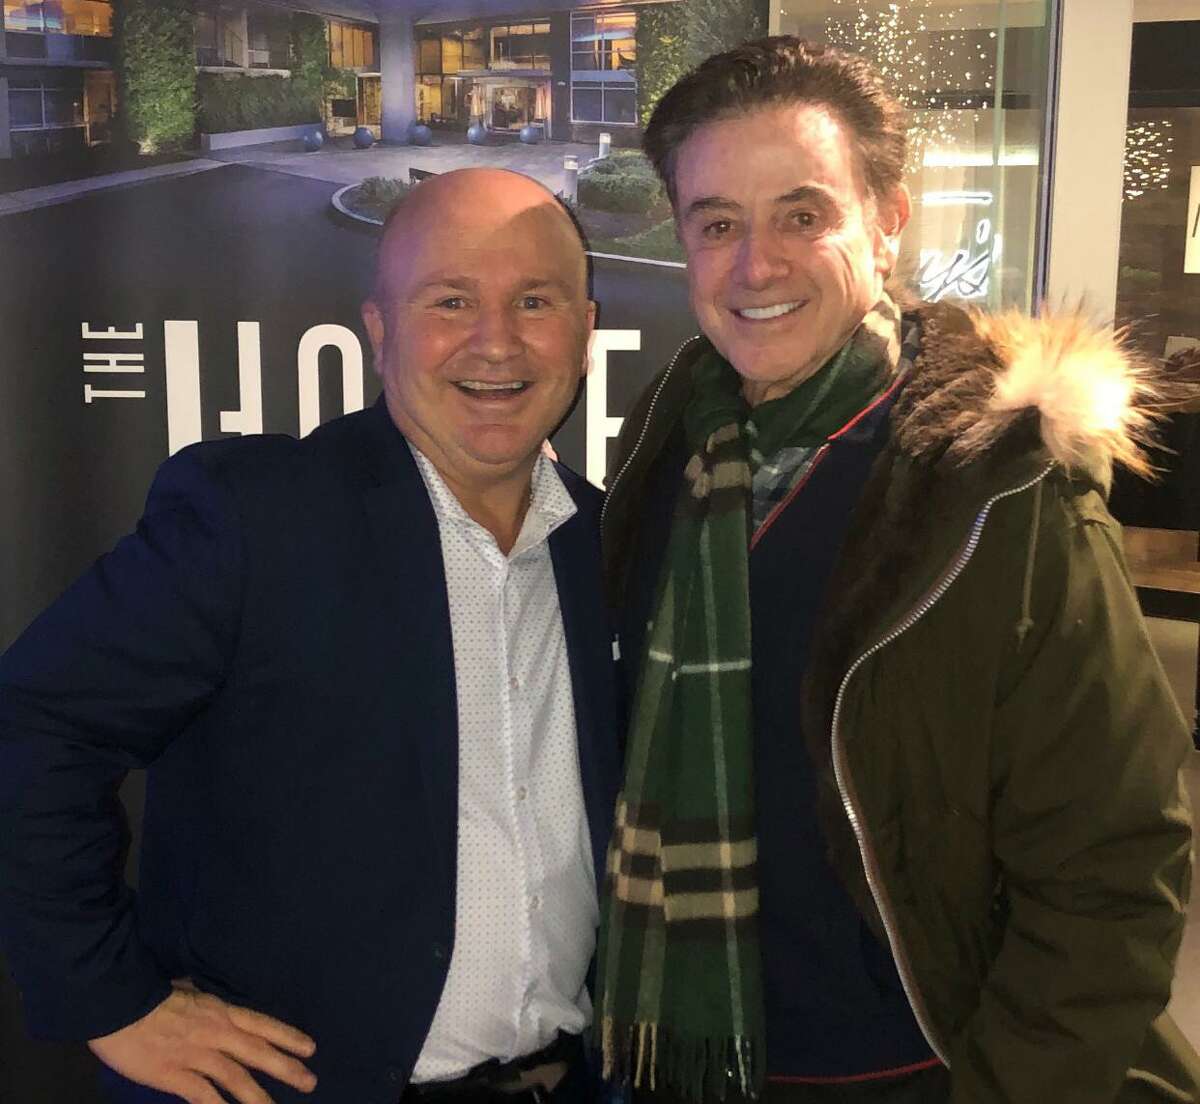 Tony Capasso, owner of Tony's at the J House poses with Rick Pitino, head basketball coach for the Iona Gaels at Iona College in New Rochelle, N.Y.